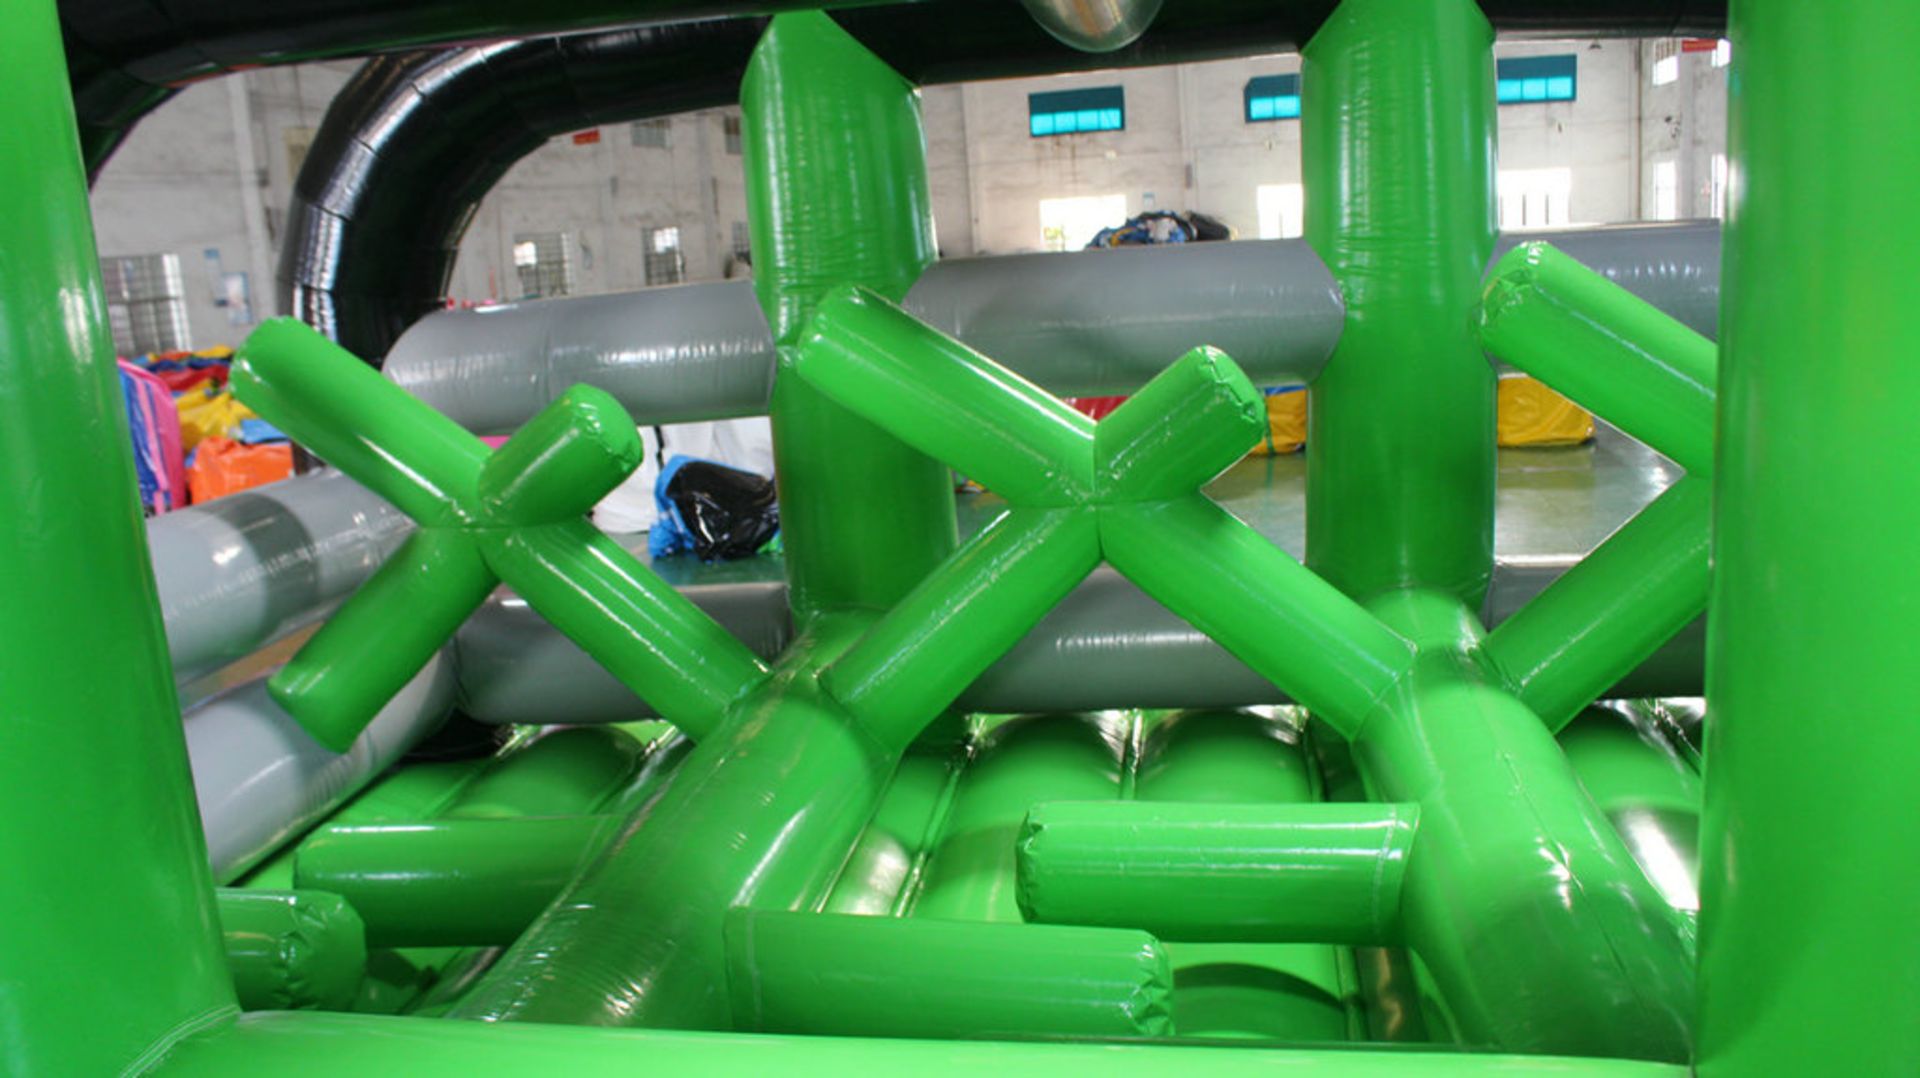 Kapow Inflatable Obstacle course, comprising 12 as - Image 25 of 46